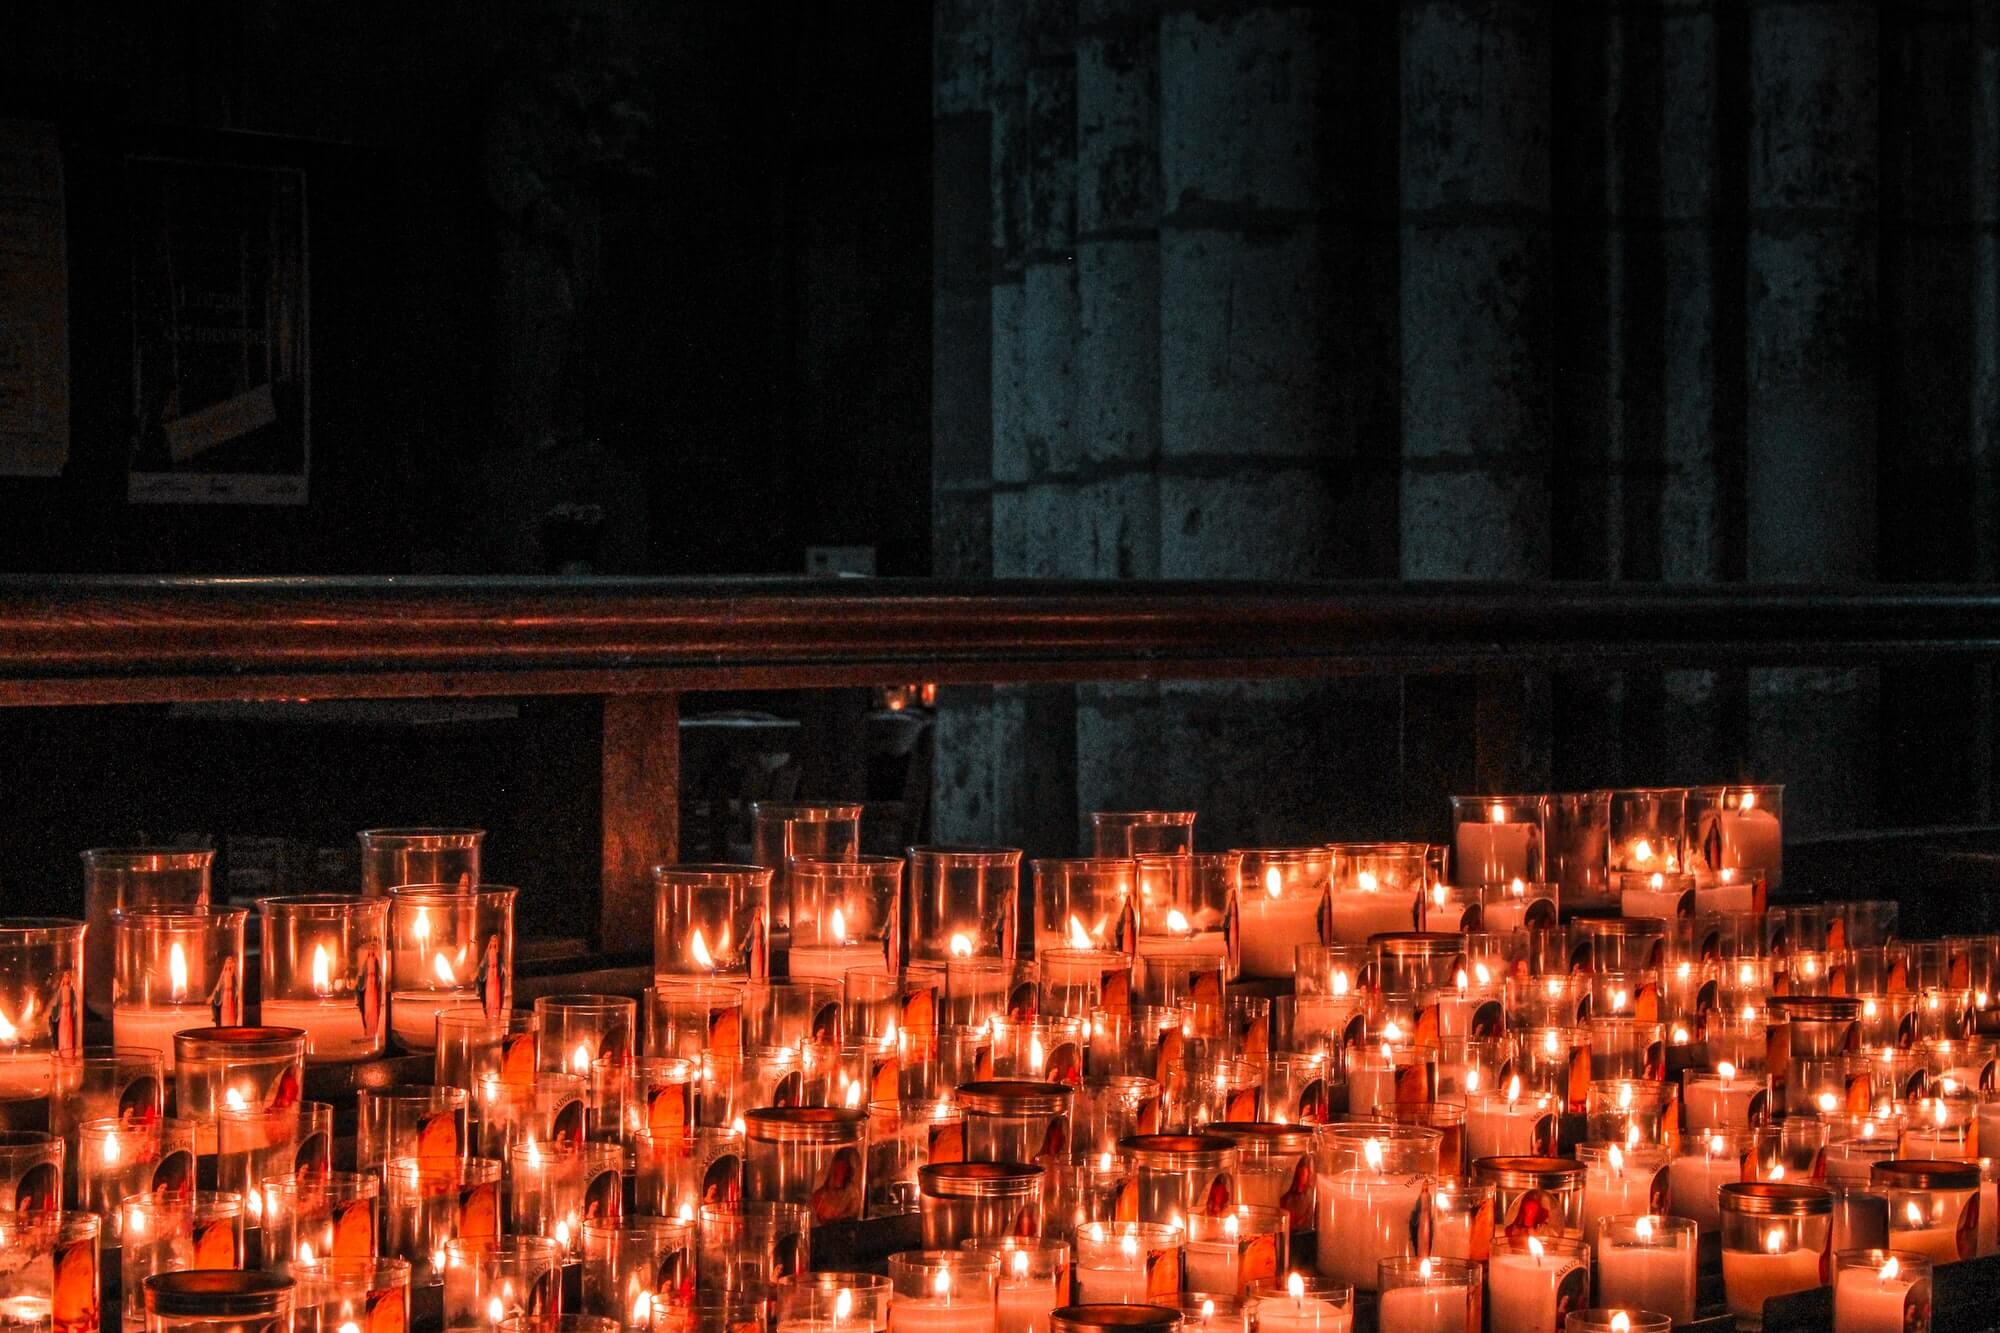 Some candles inside de cathedrale of Rouen, France